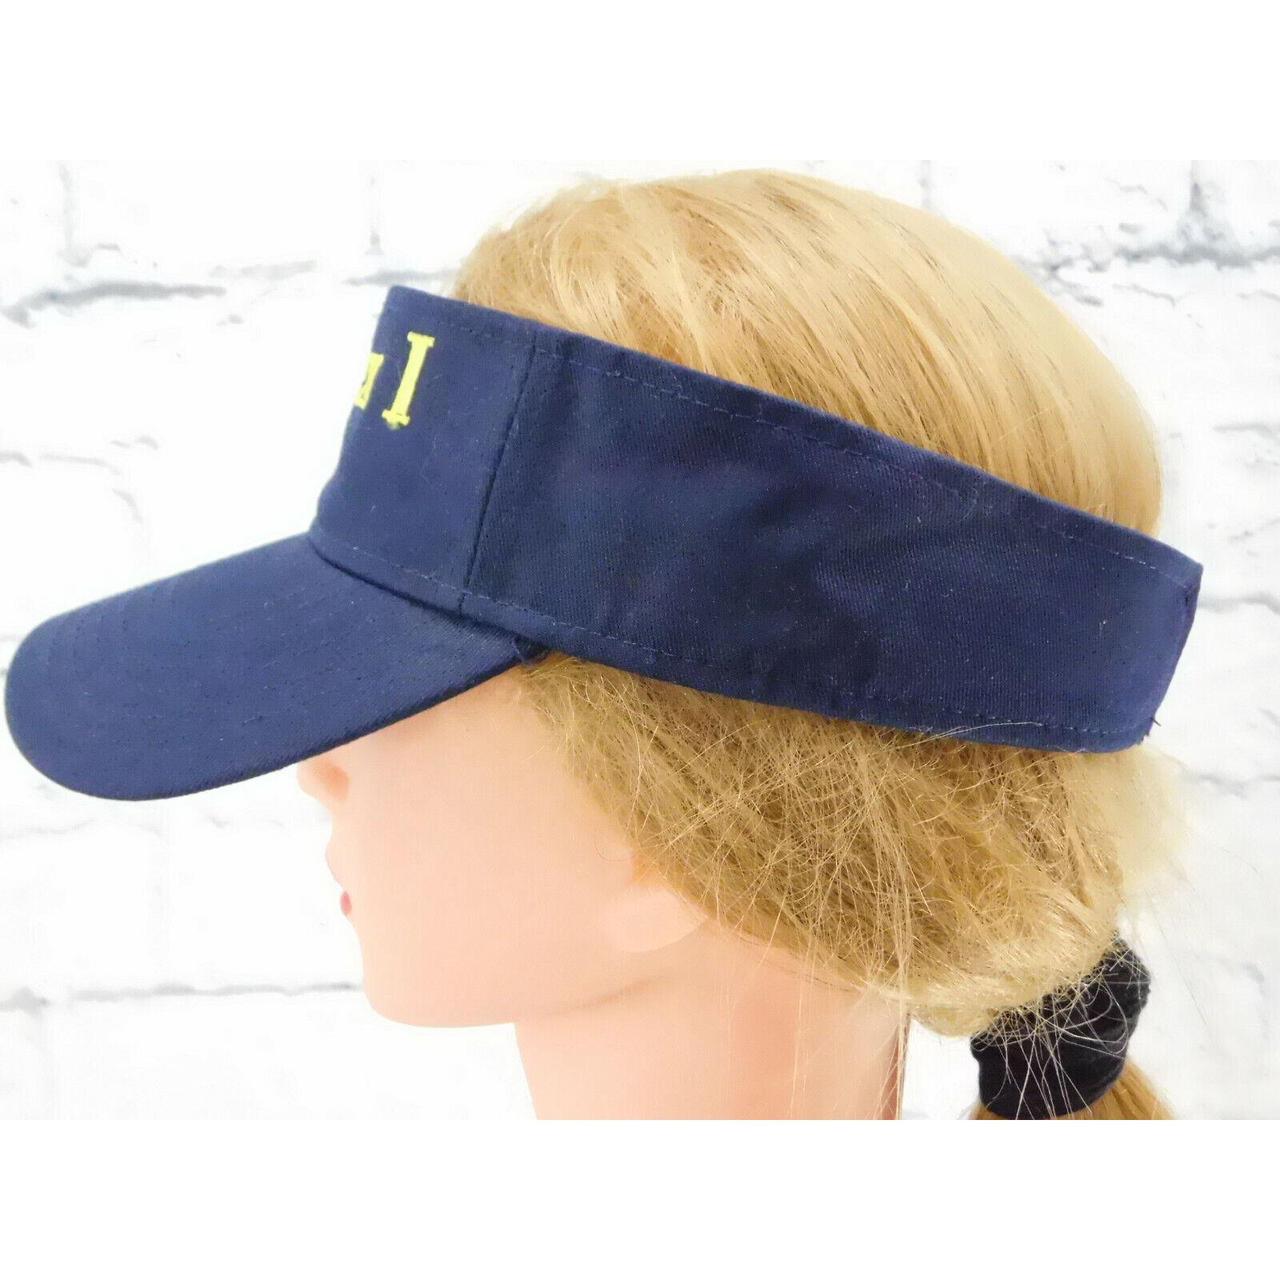 Lotto Men's Navy and Blue Hat (3)